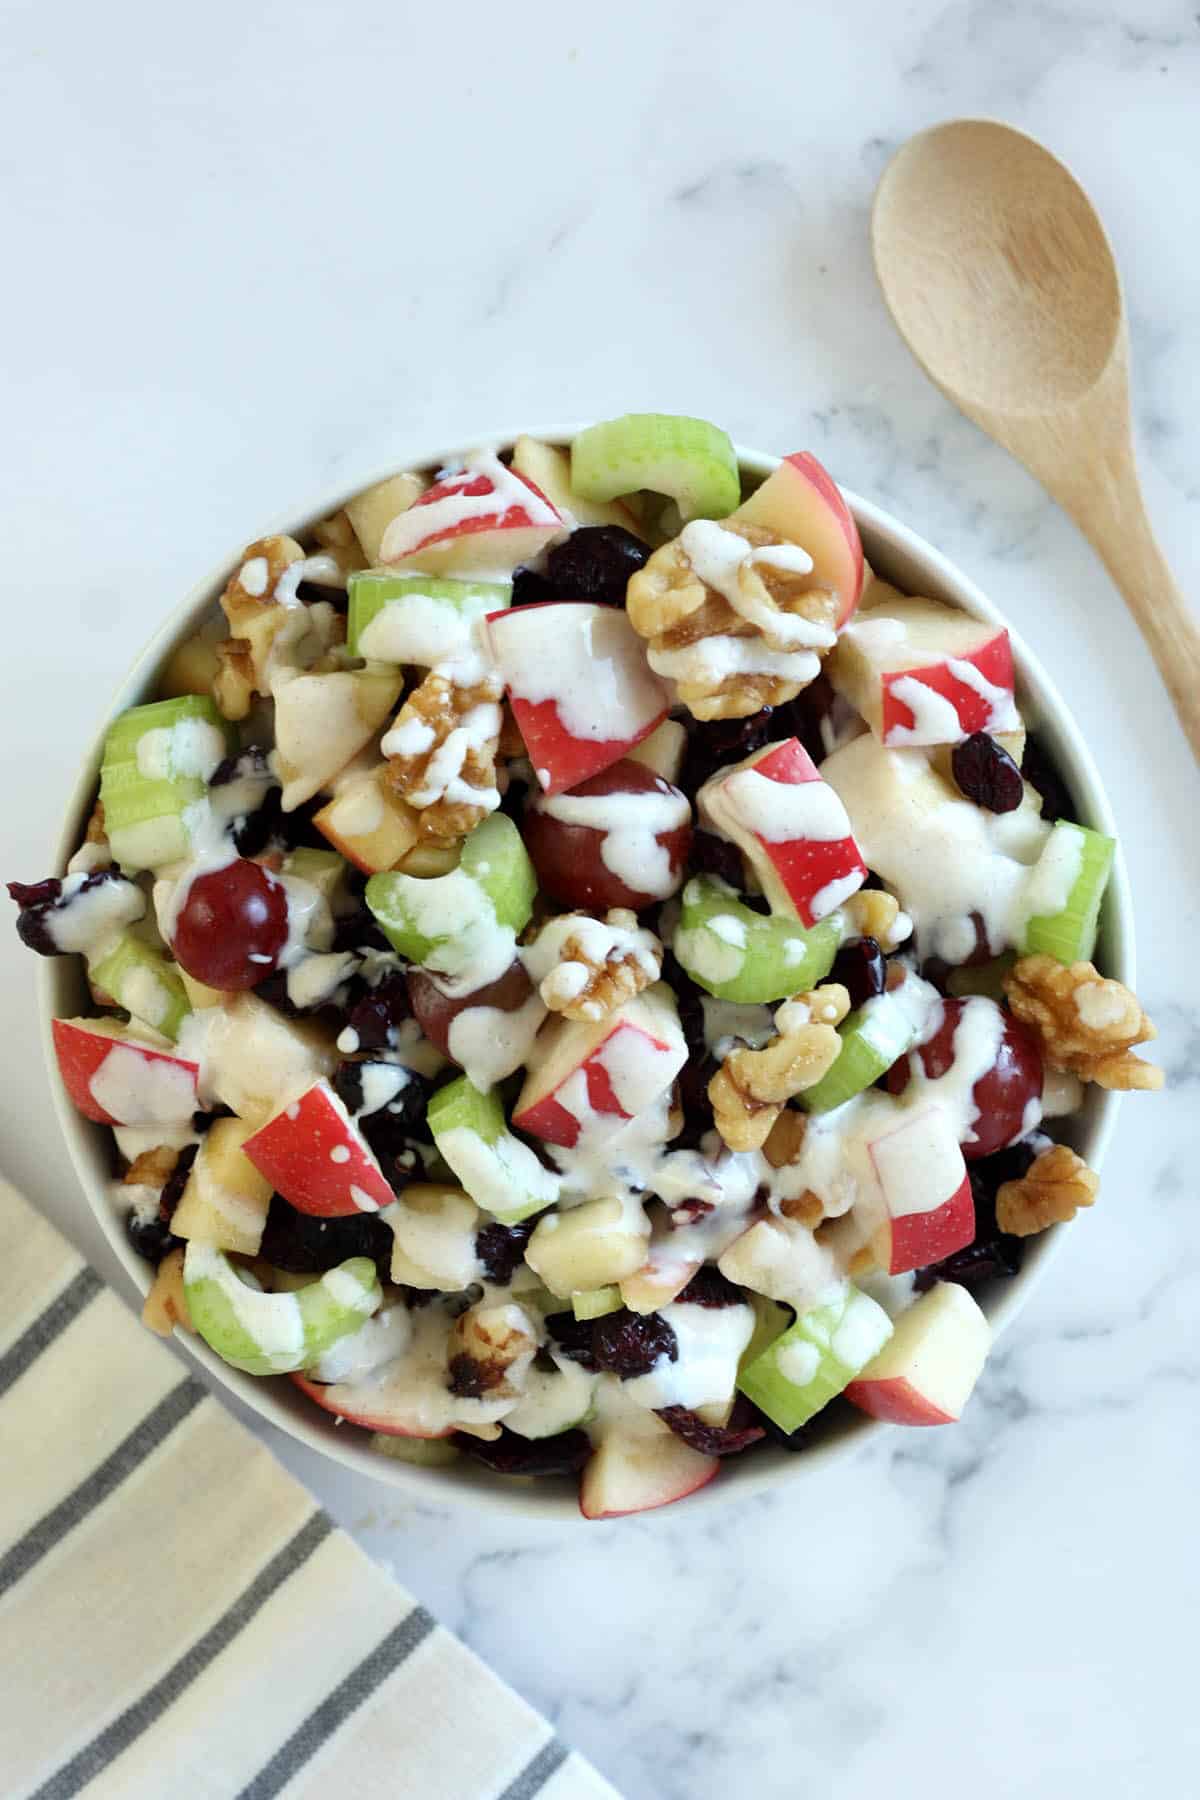 waldorf salad recipe in a bowl with a wooden spoon